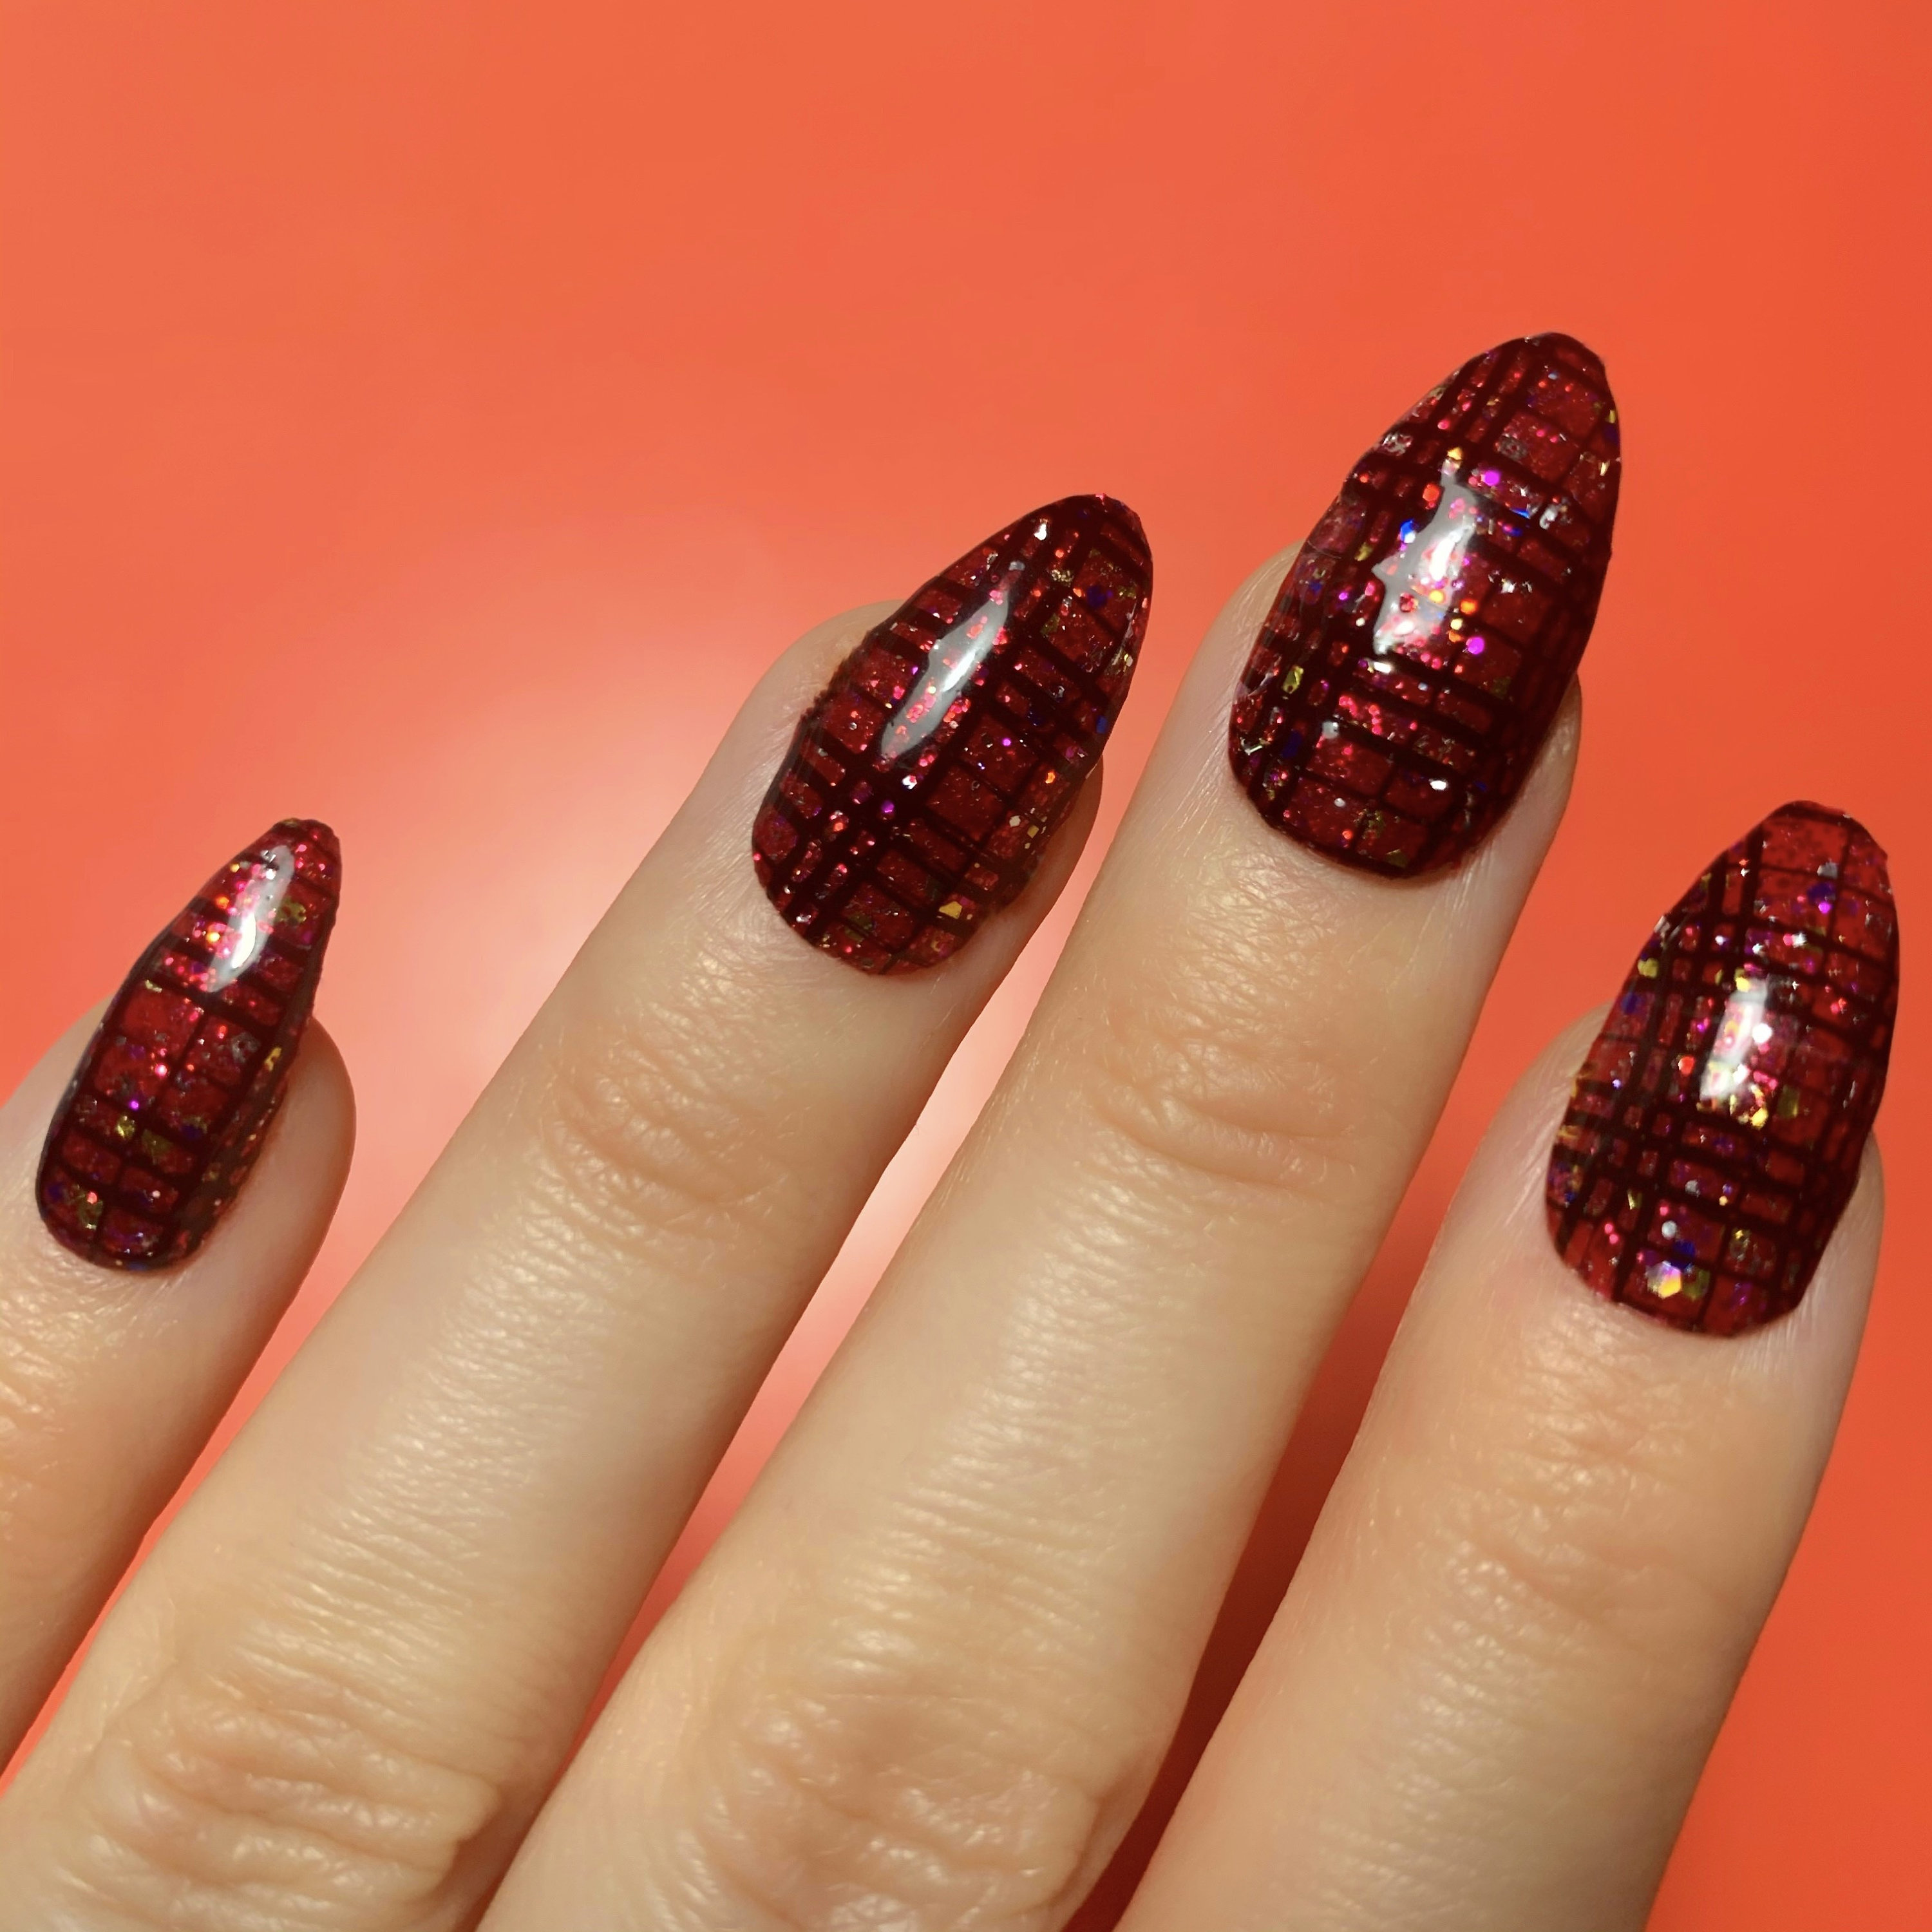 How to Do Glitter Ombre Nails « Nails & Manicure :: WonderHowTo